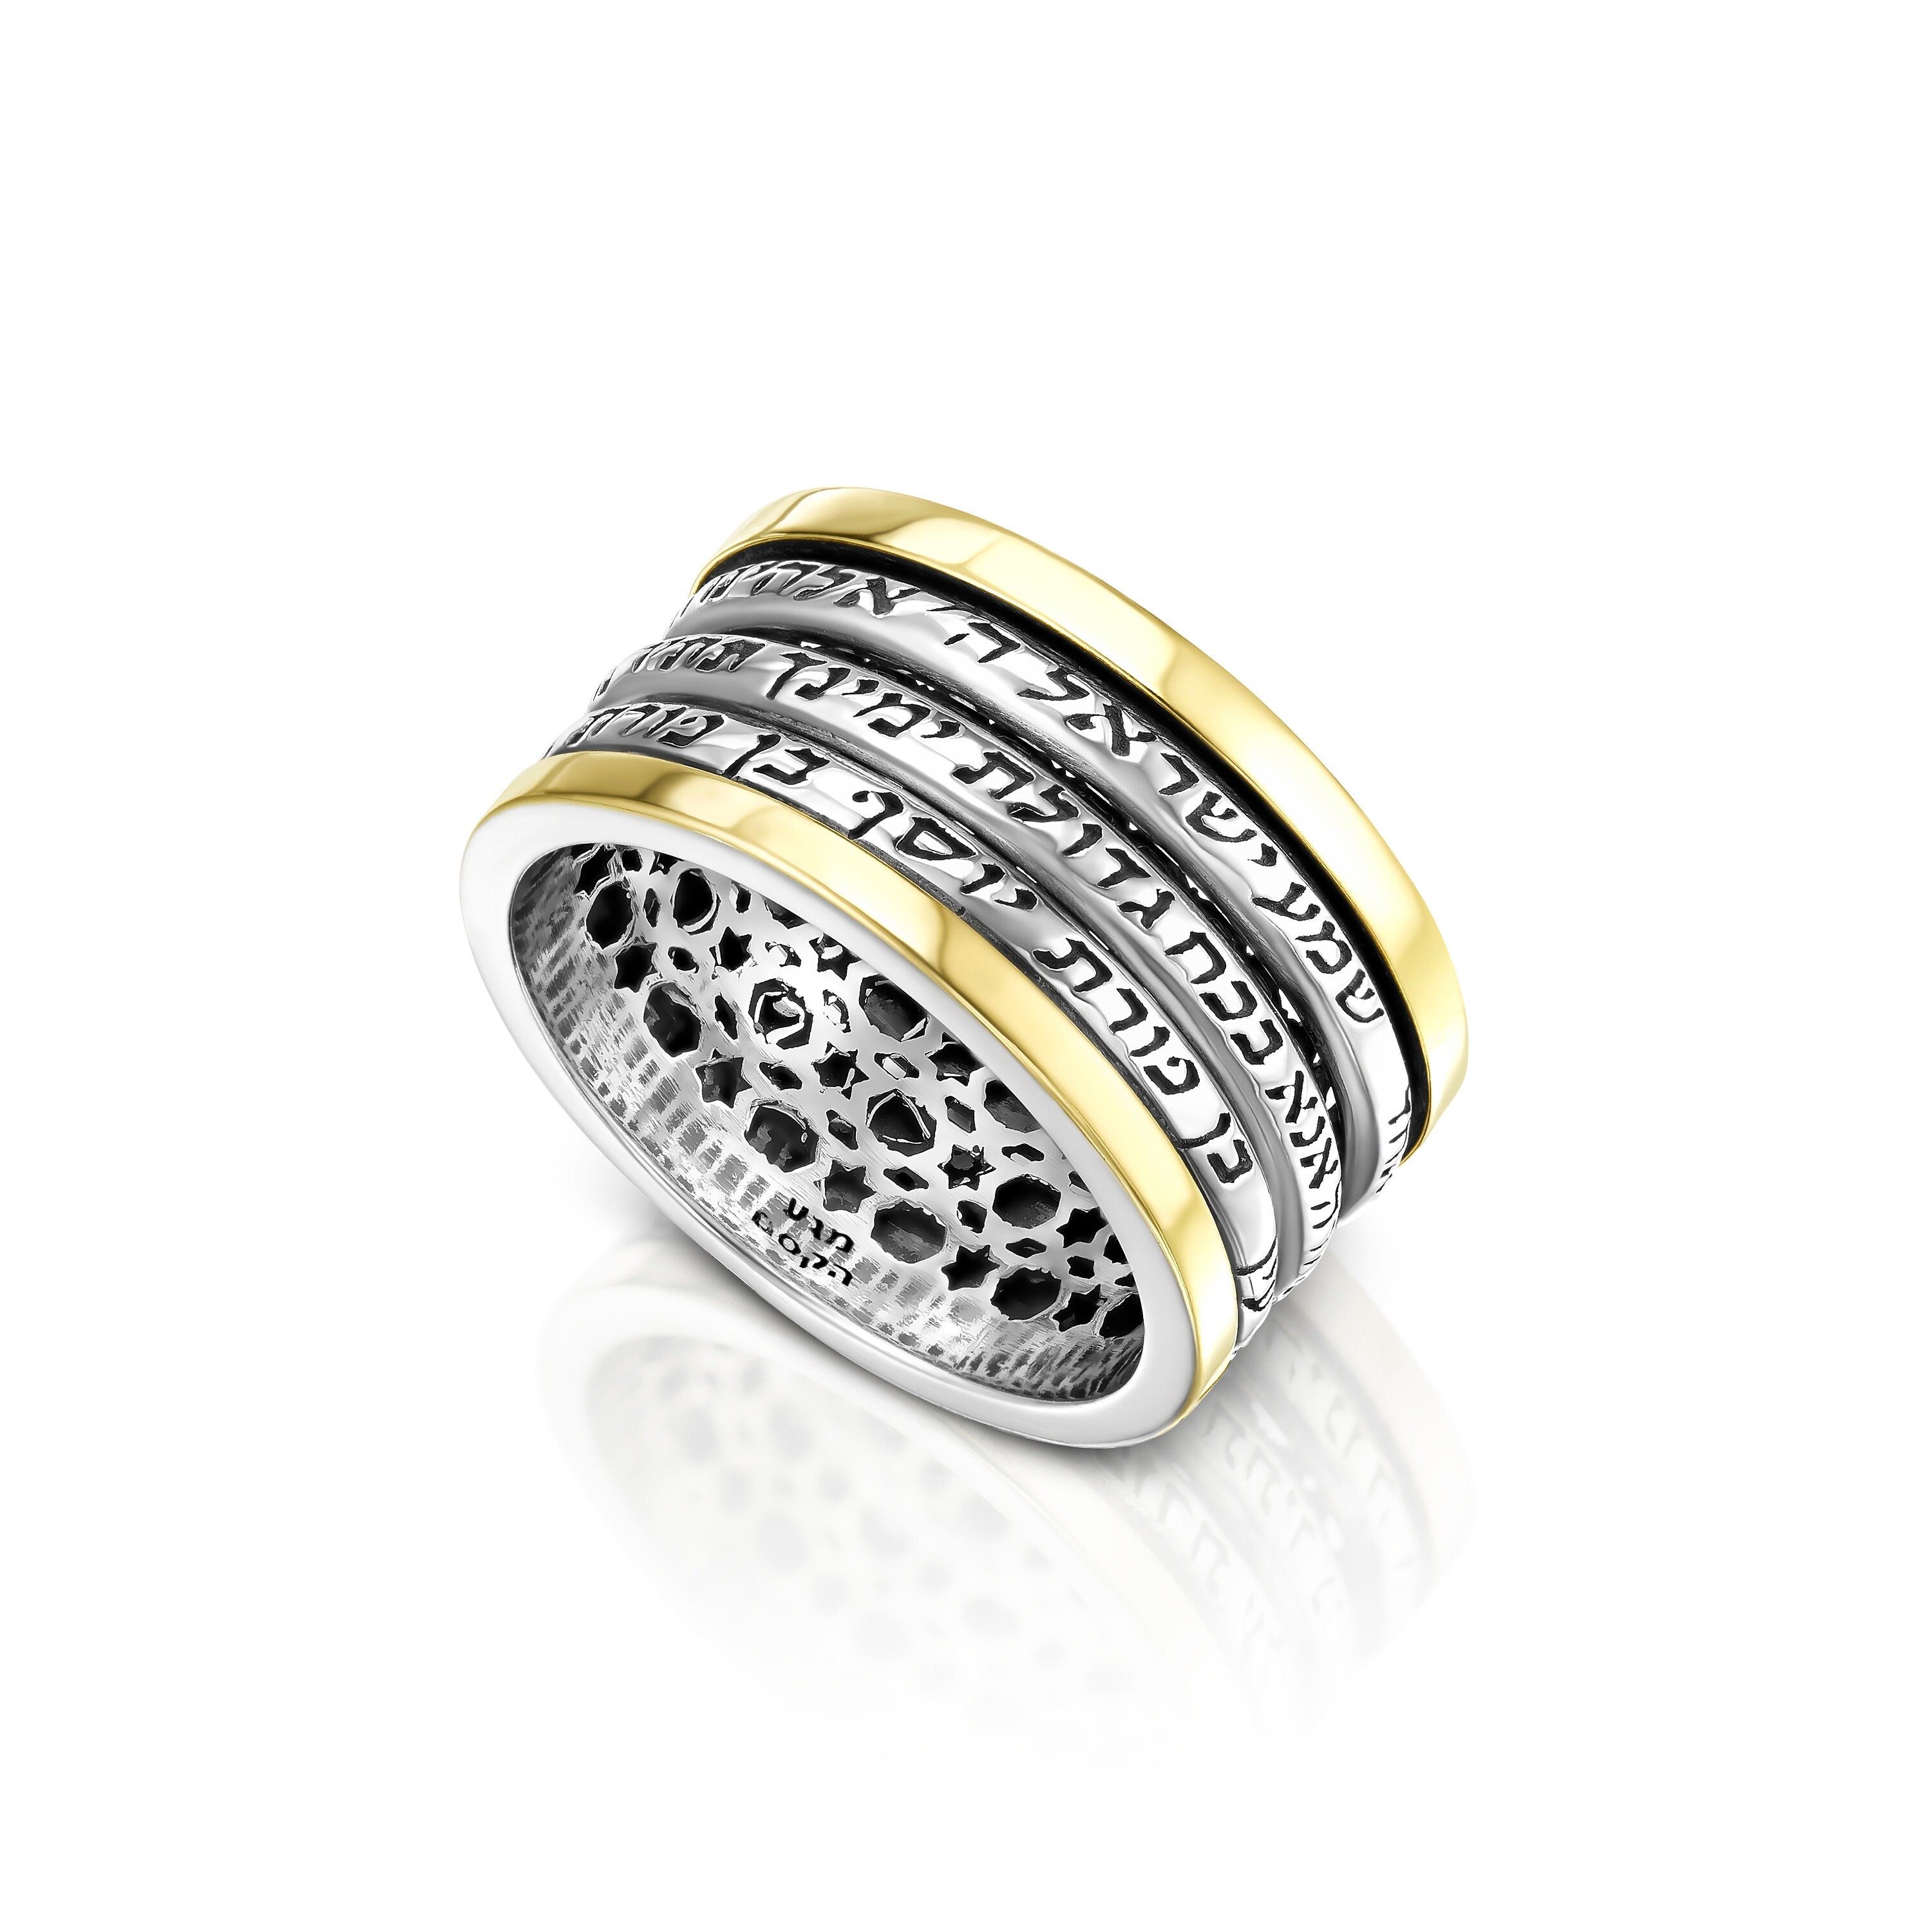 Jewish Jewelry: 925 Sterling Silver & 9K Gold Spinning Ring | Shema Israel / Ana Bekoach Blessing Ring | 40th Birthday Gift for Her